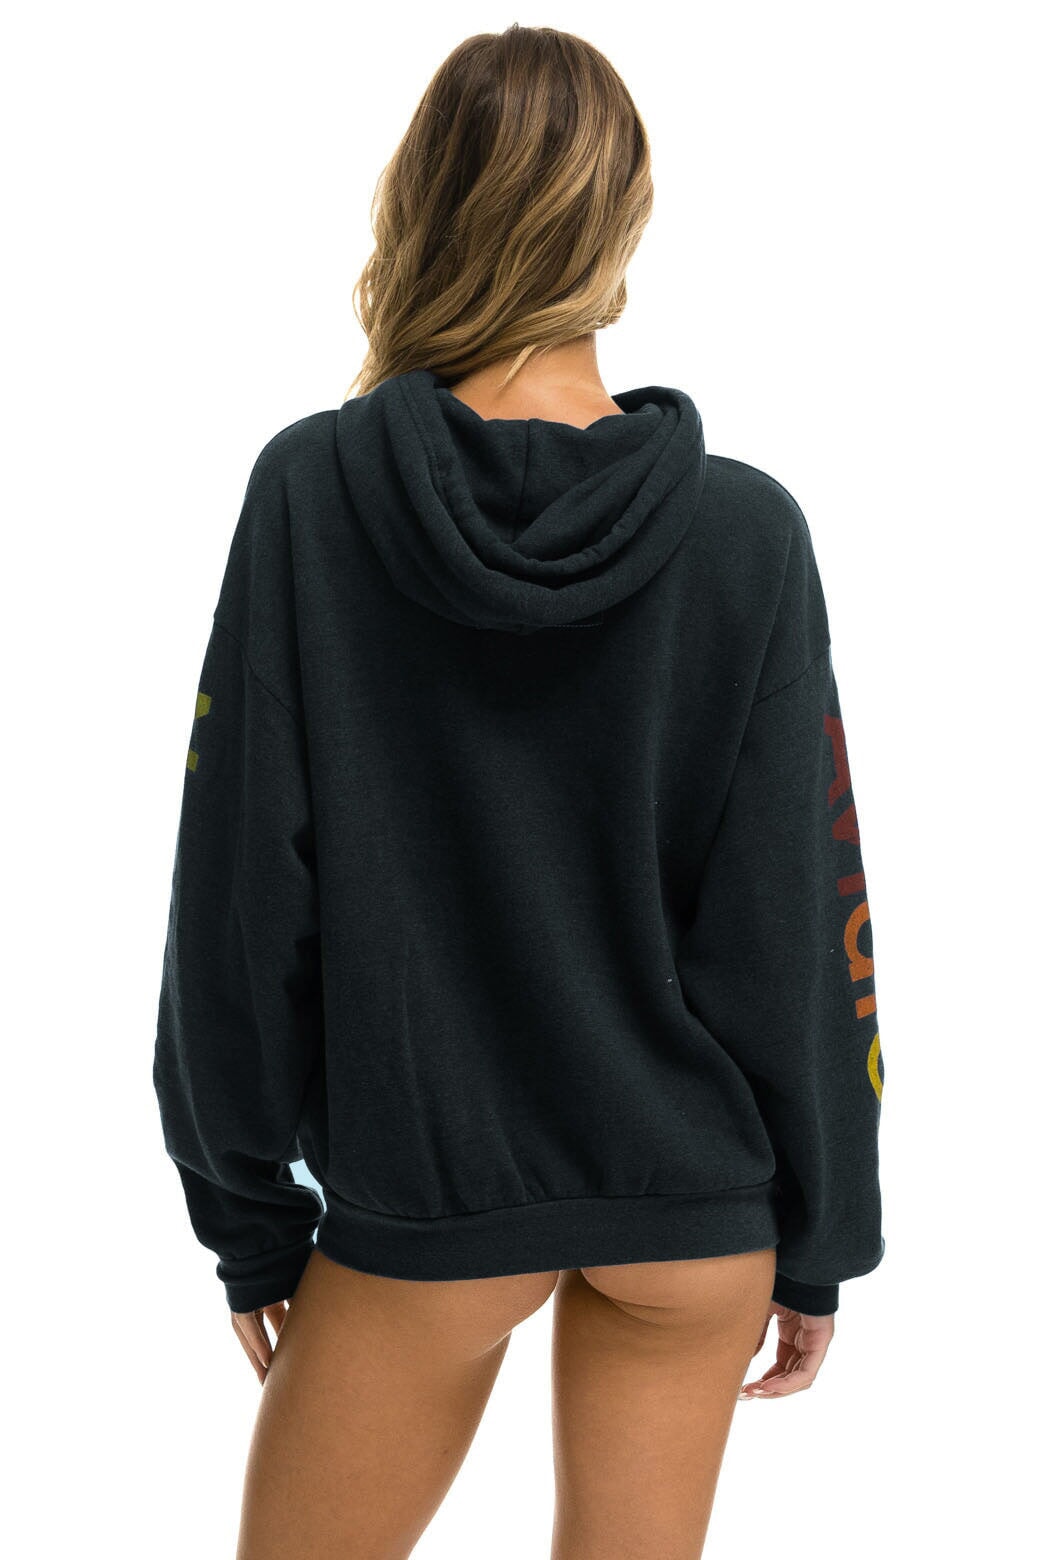 AVIATOR NATION NASHVILLE RELAXED PULLOVER HOODIE - CHARCOAL Hoodie Aviator Nation 